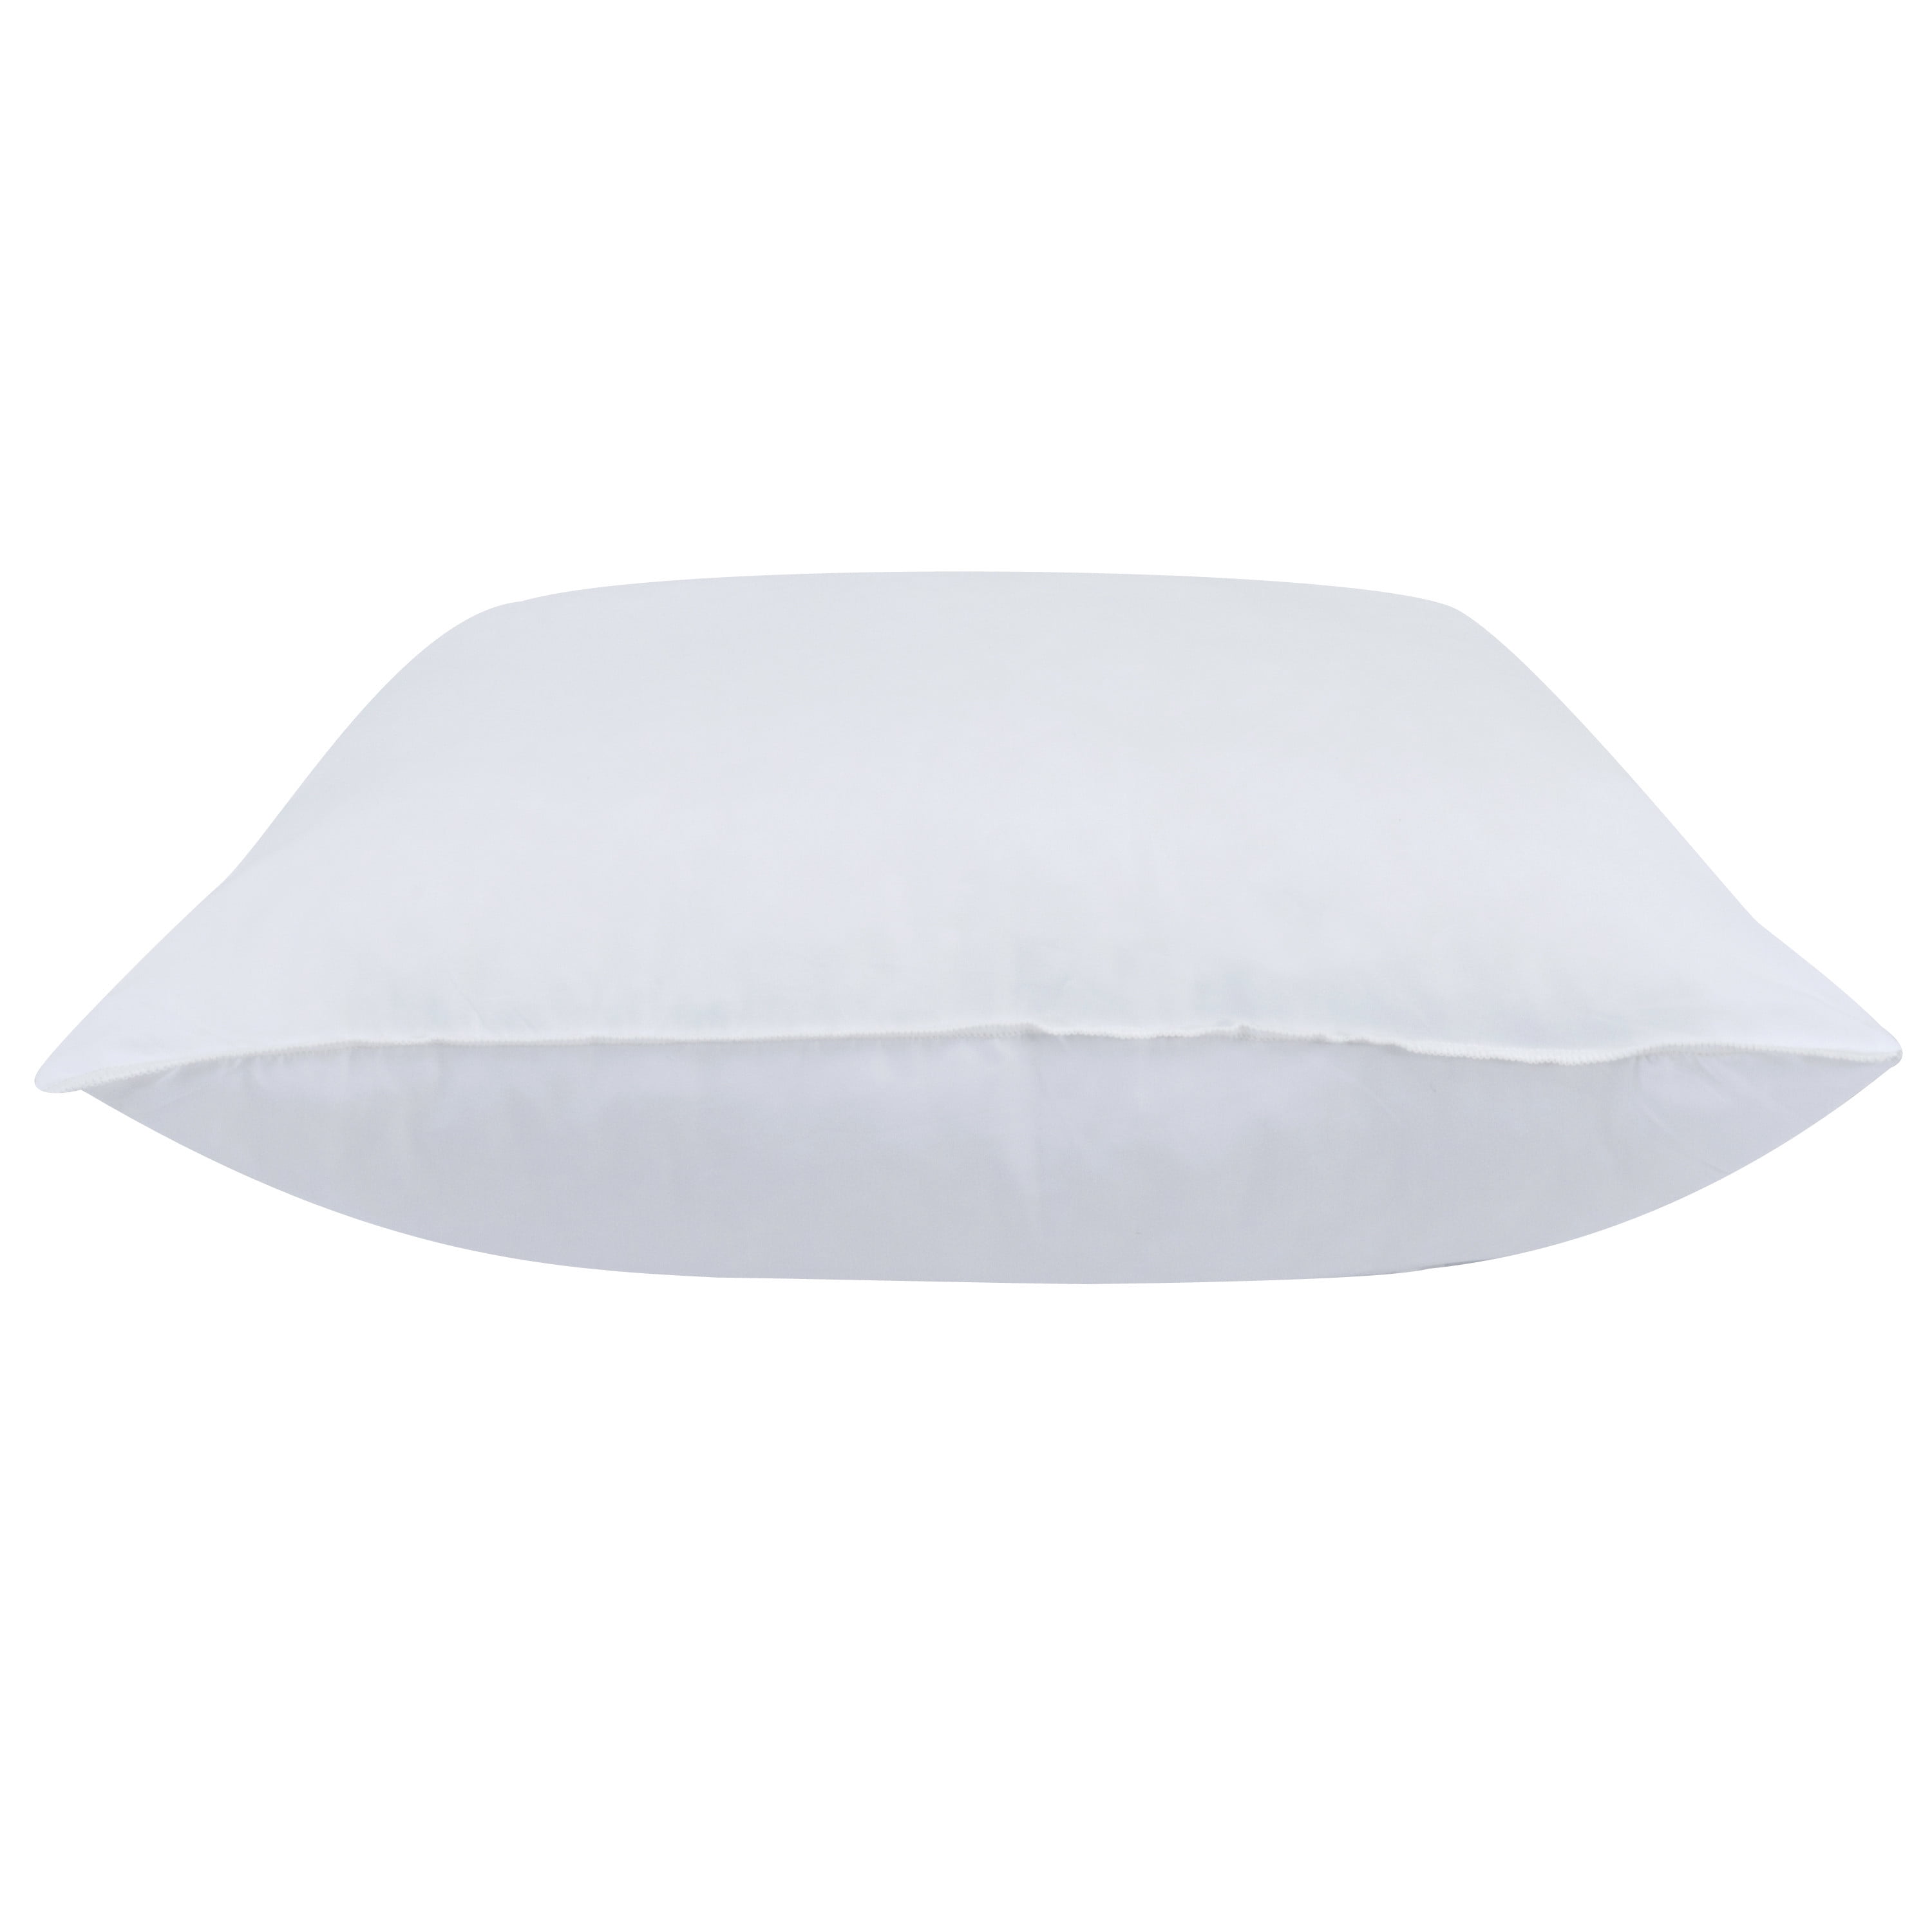 White 100% Polyester Fibre Filled Kayau Pillow Insert 18x18inch Square